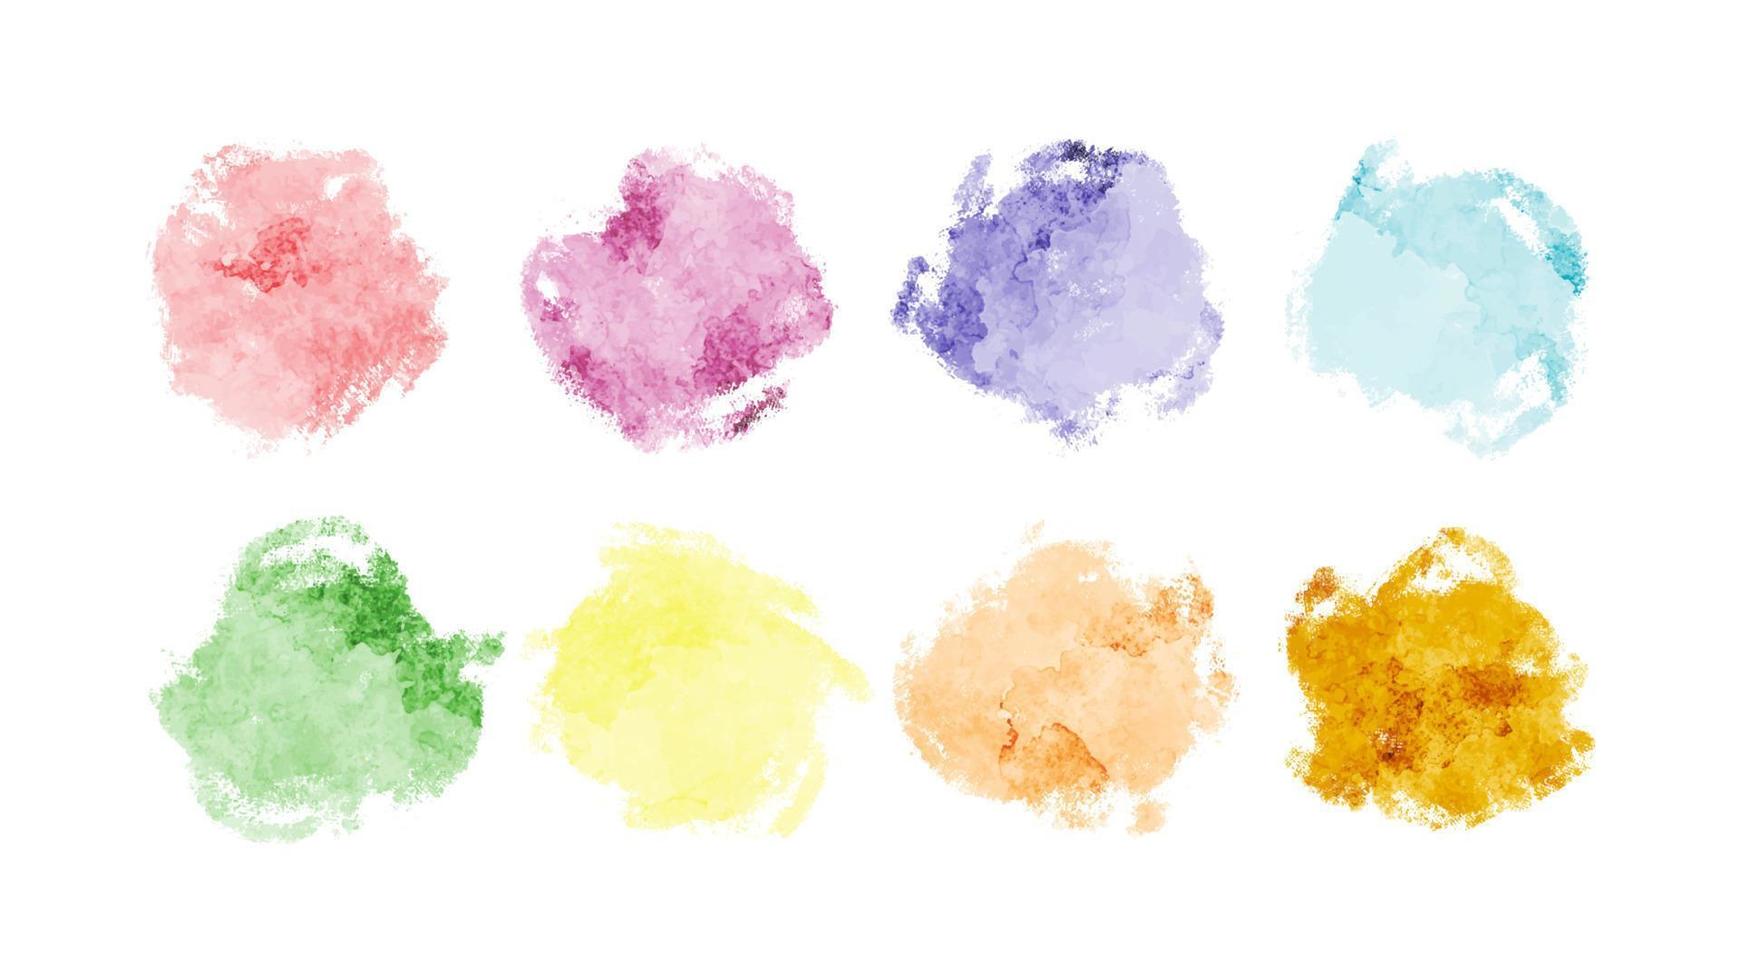 watercolor vector splashes, background for title and logo